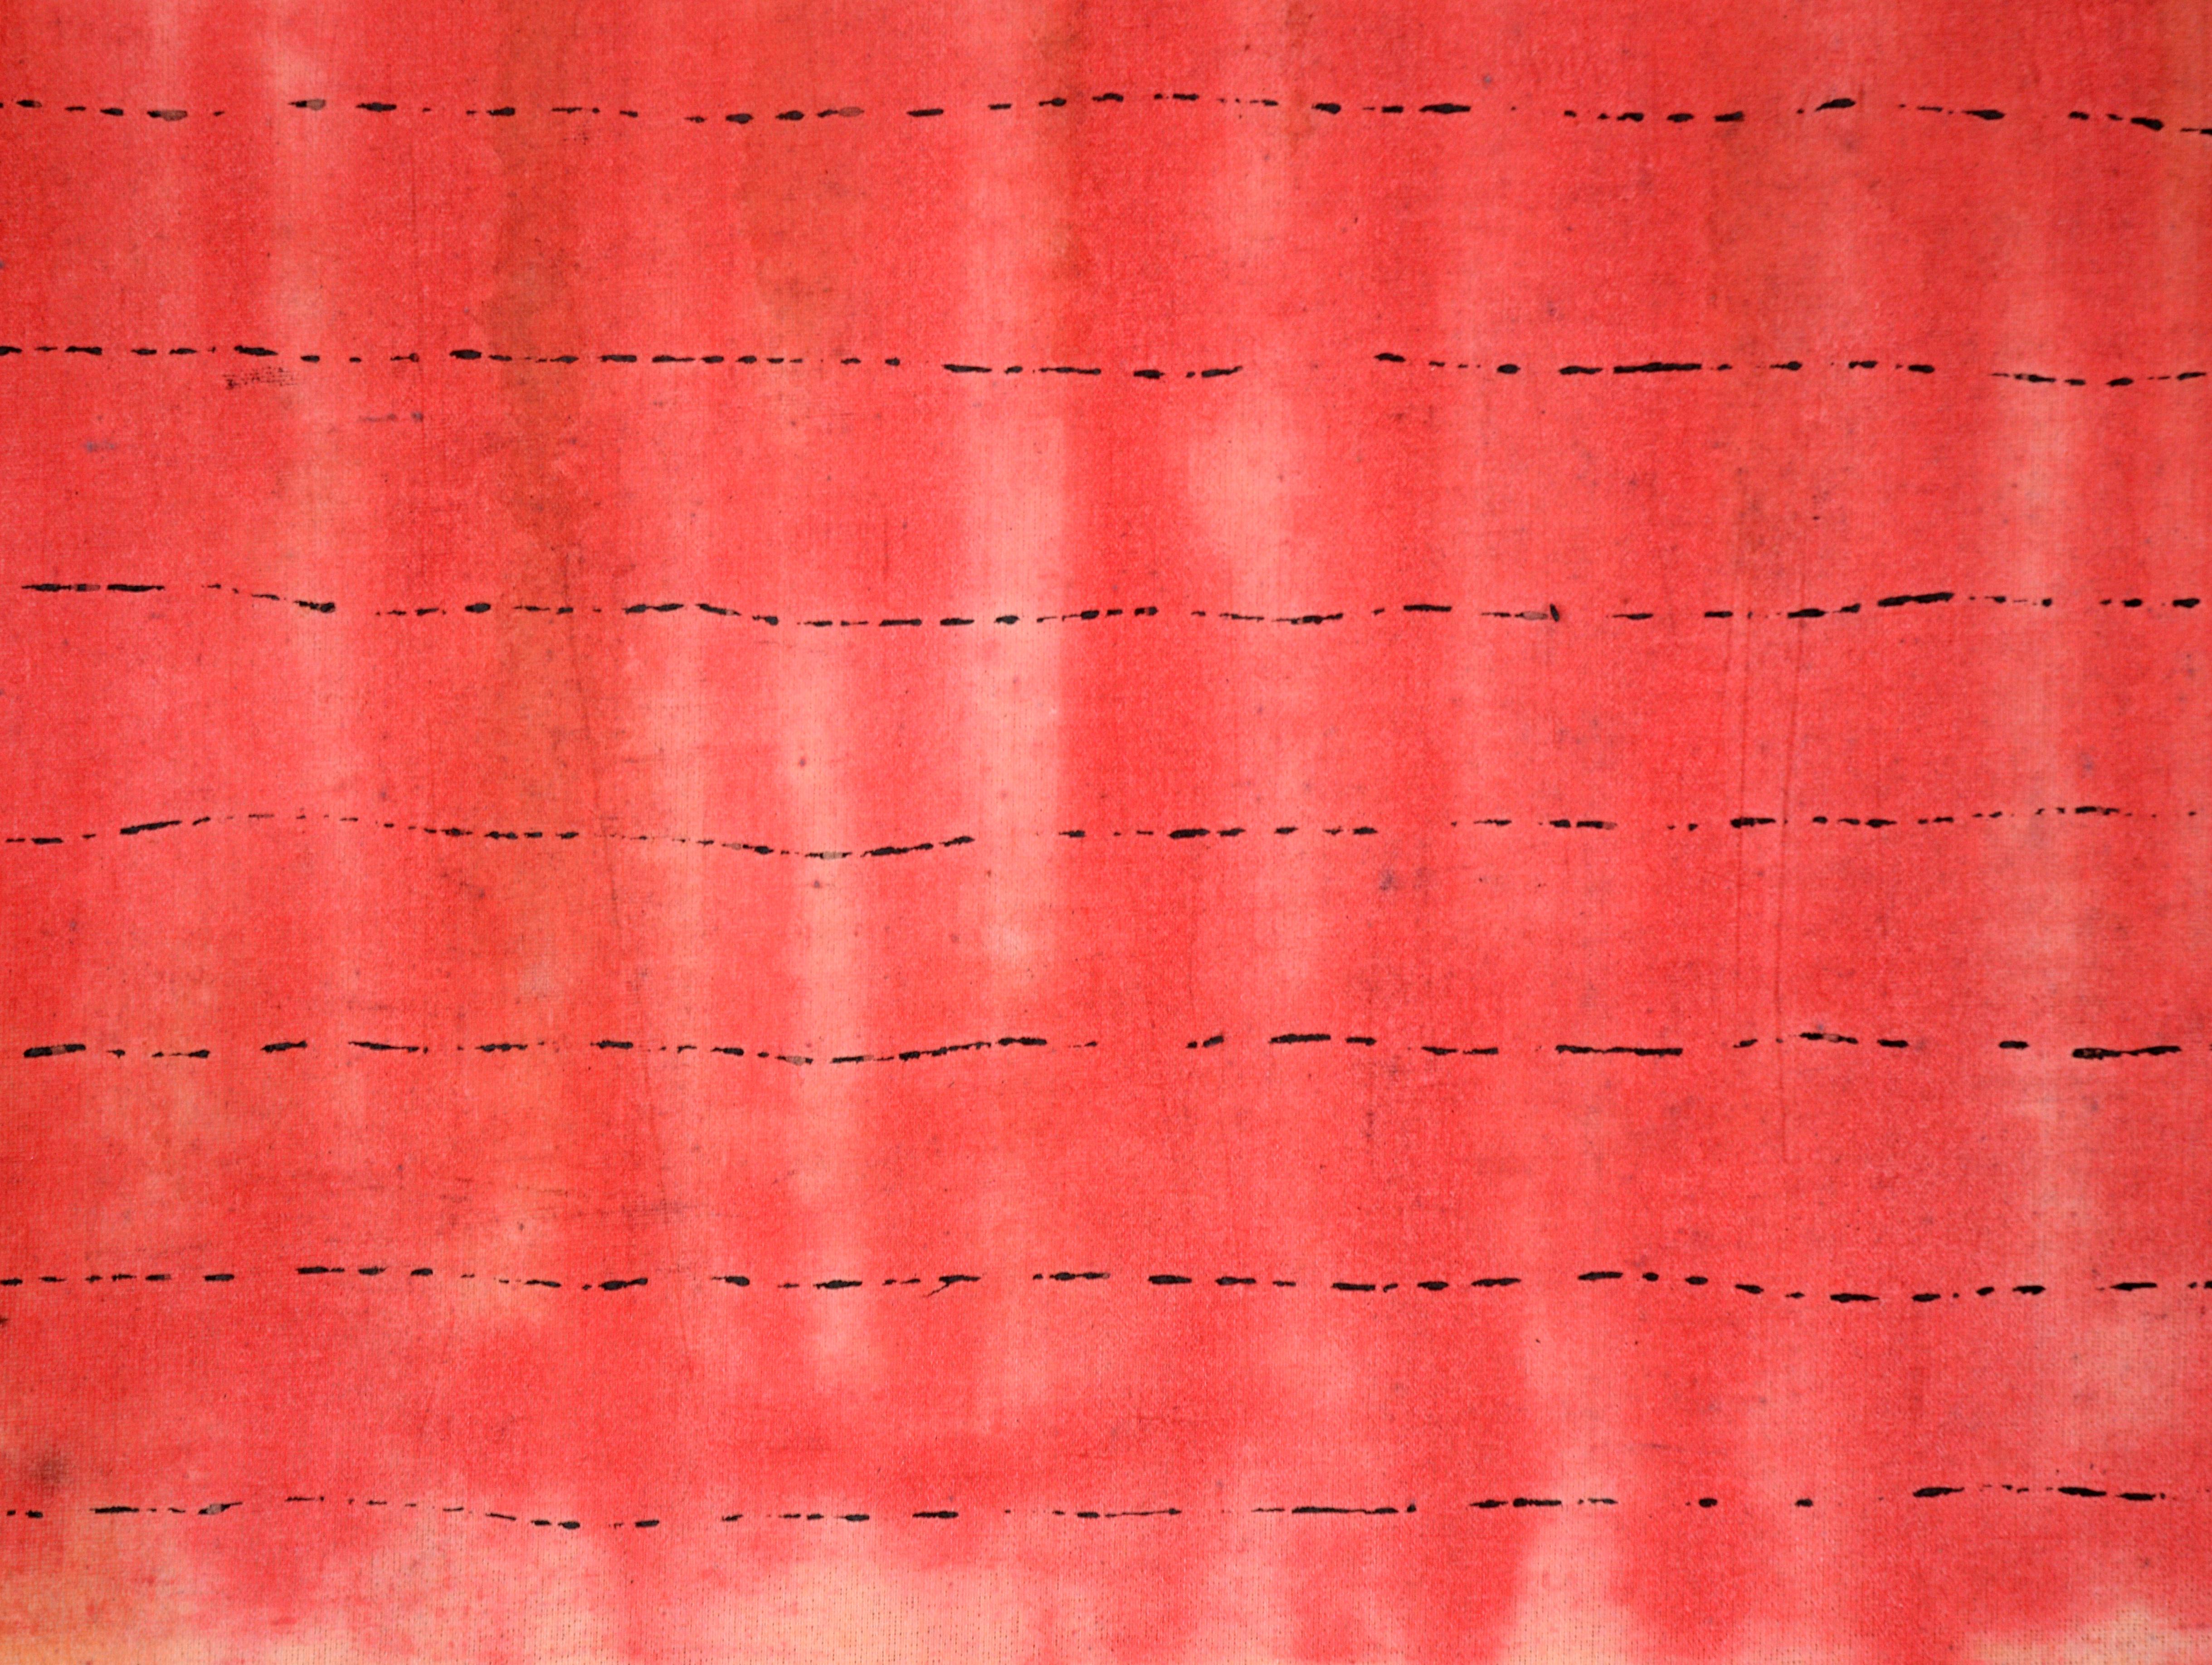 Black Lines Across a Red Field - Abstract Composition on Starched Linen 1